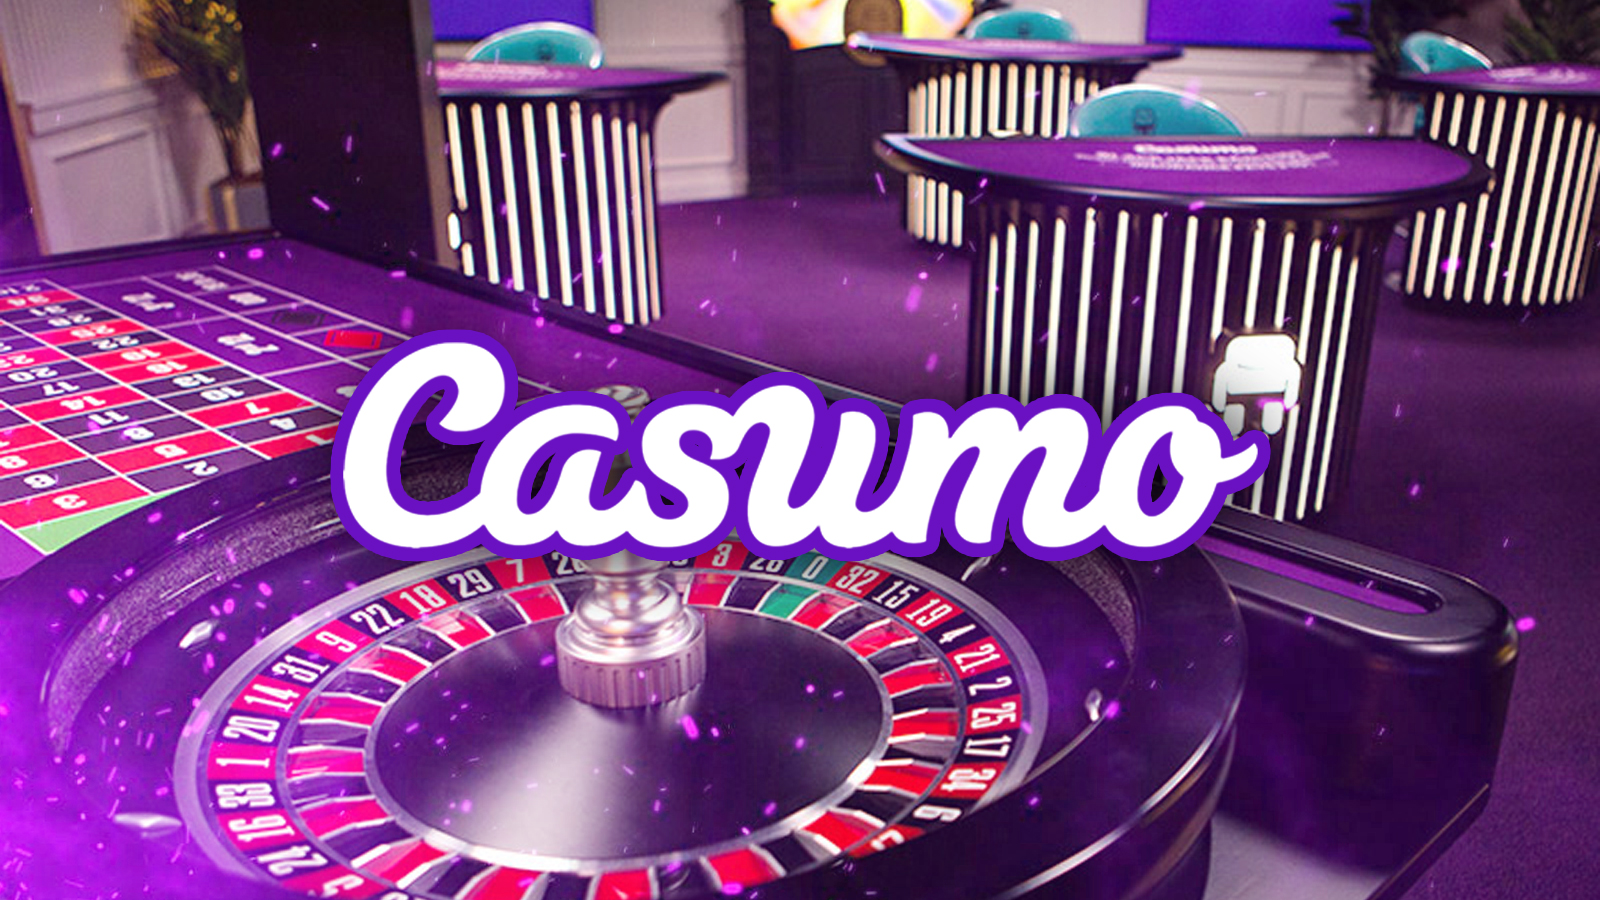 Play the best online slots at Casumo Casino.